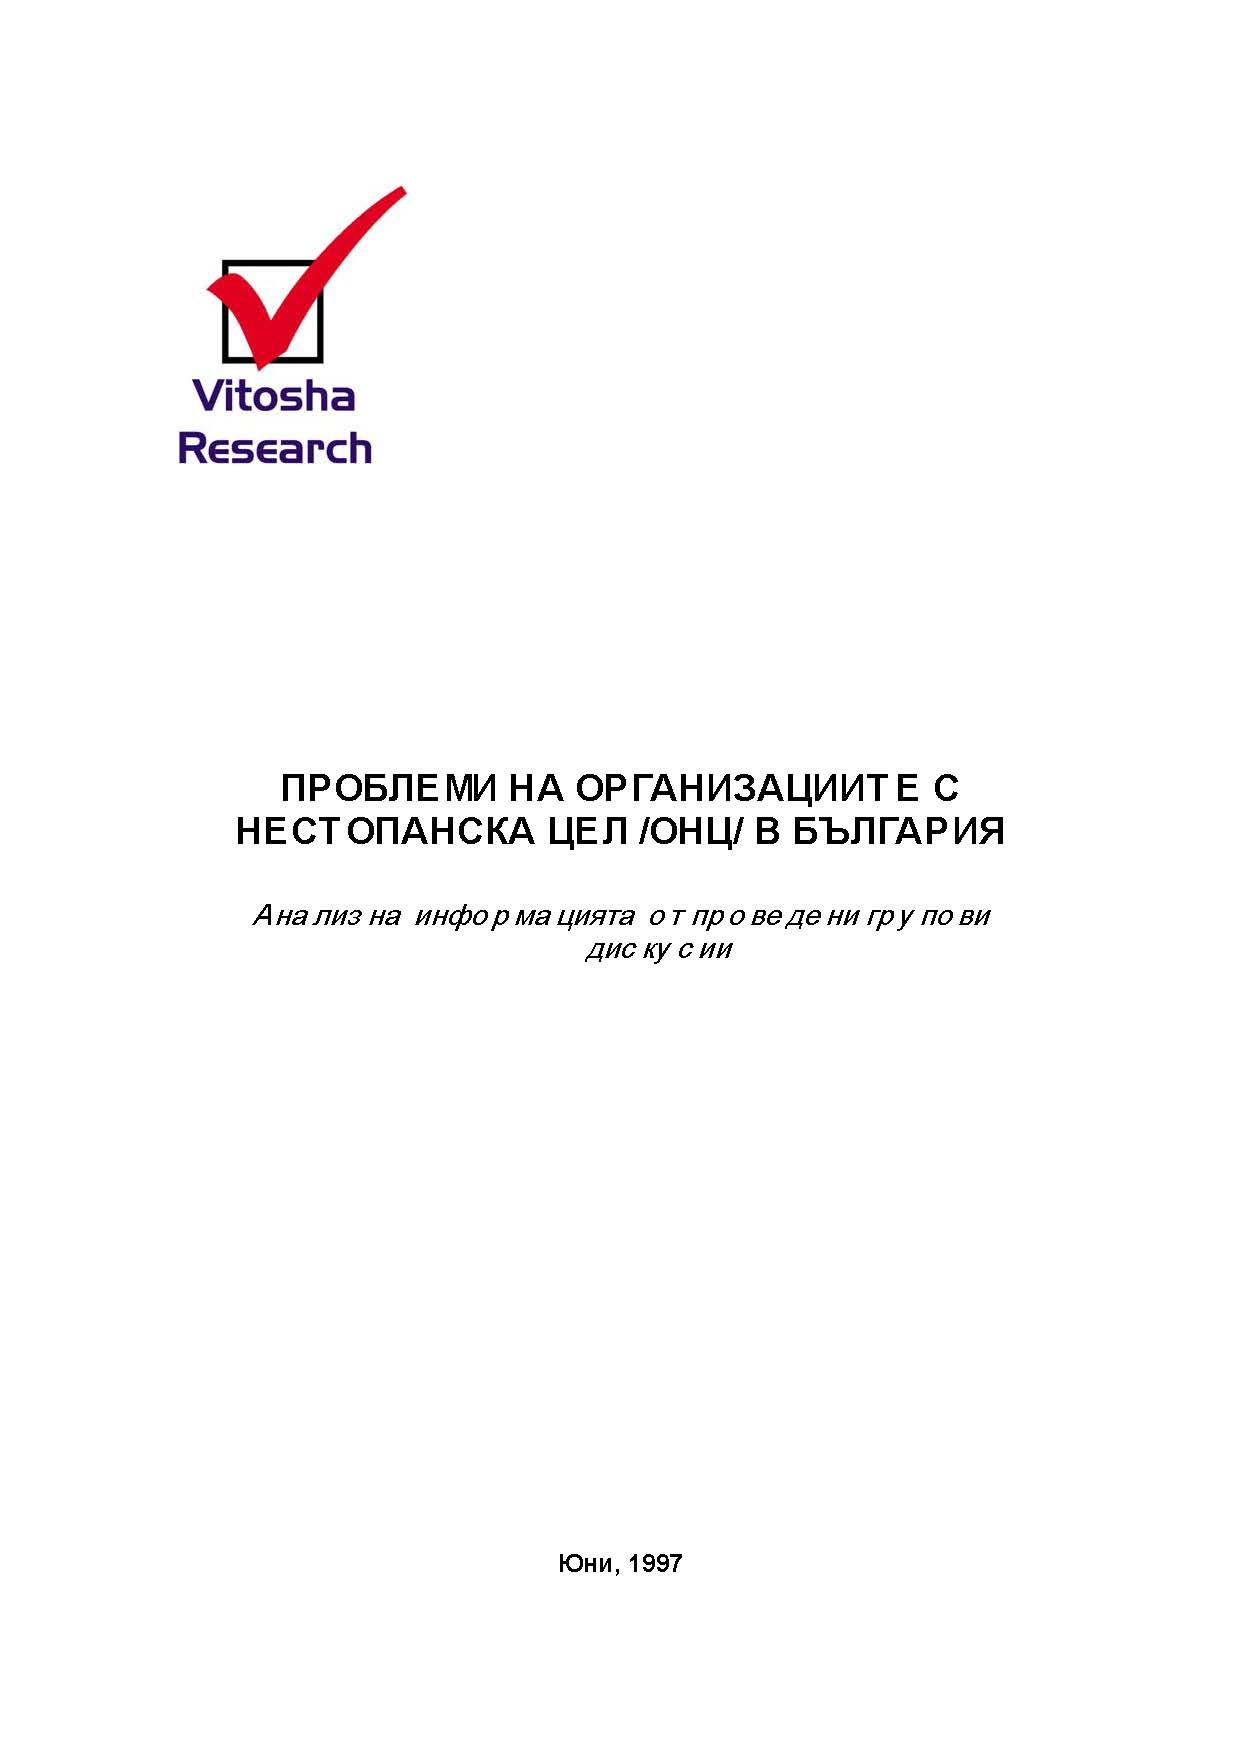 Problems of Not-For-Profit Organizations in Bulgaria, June 1997 Cover Image